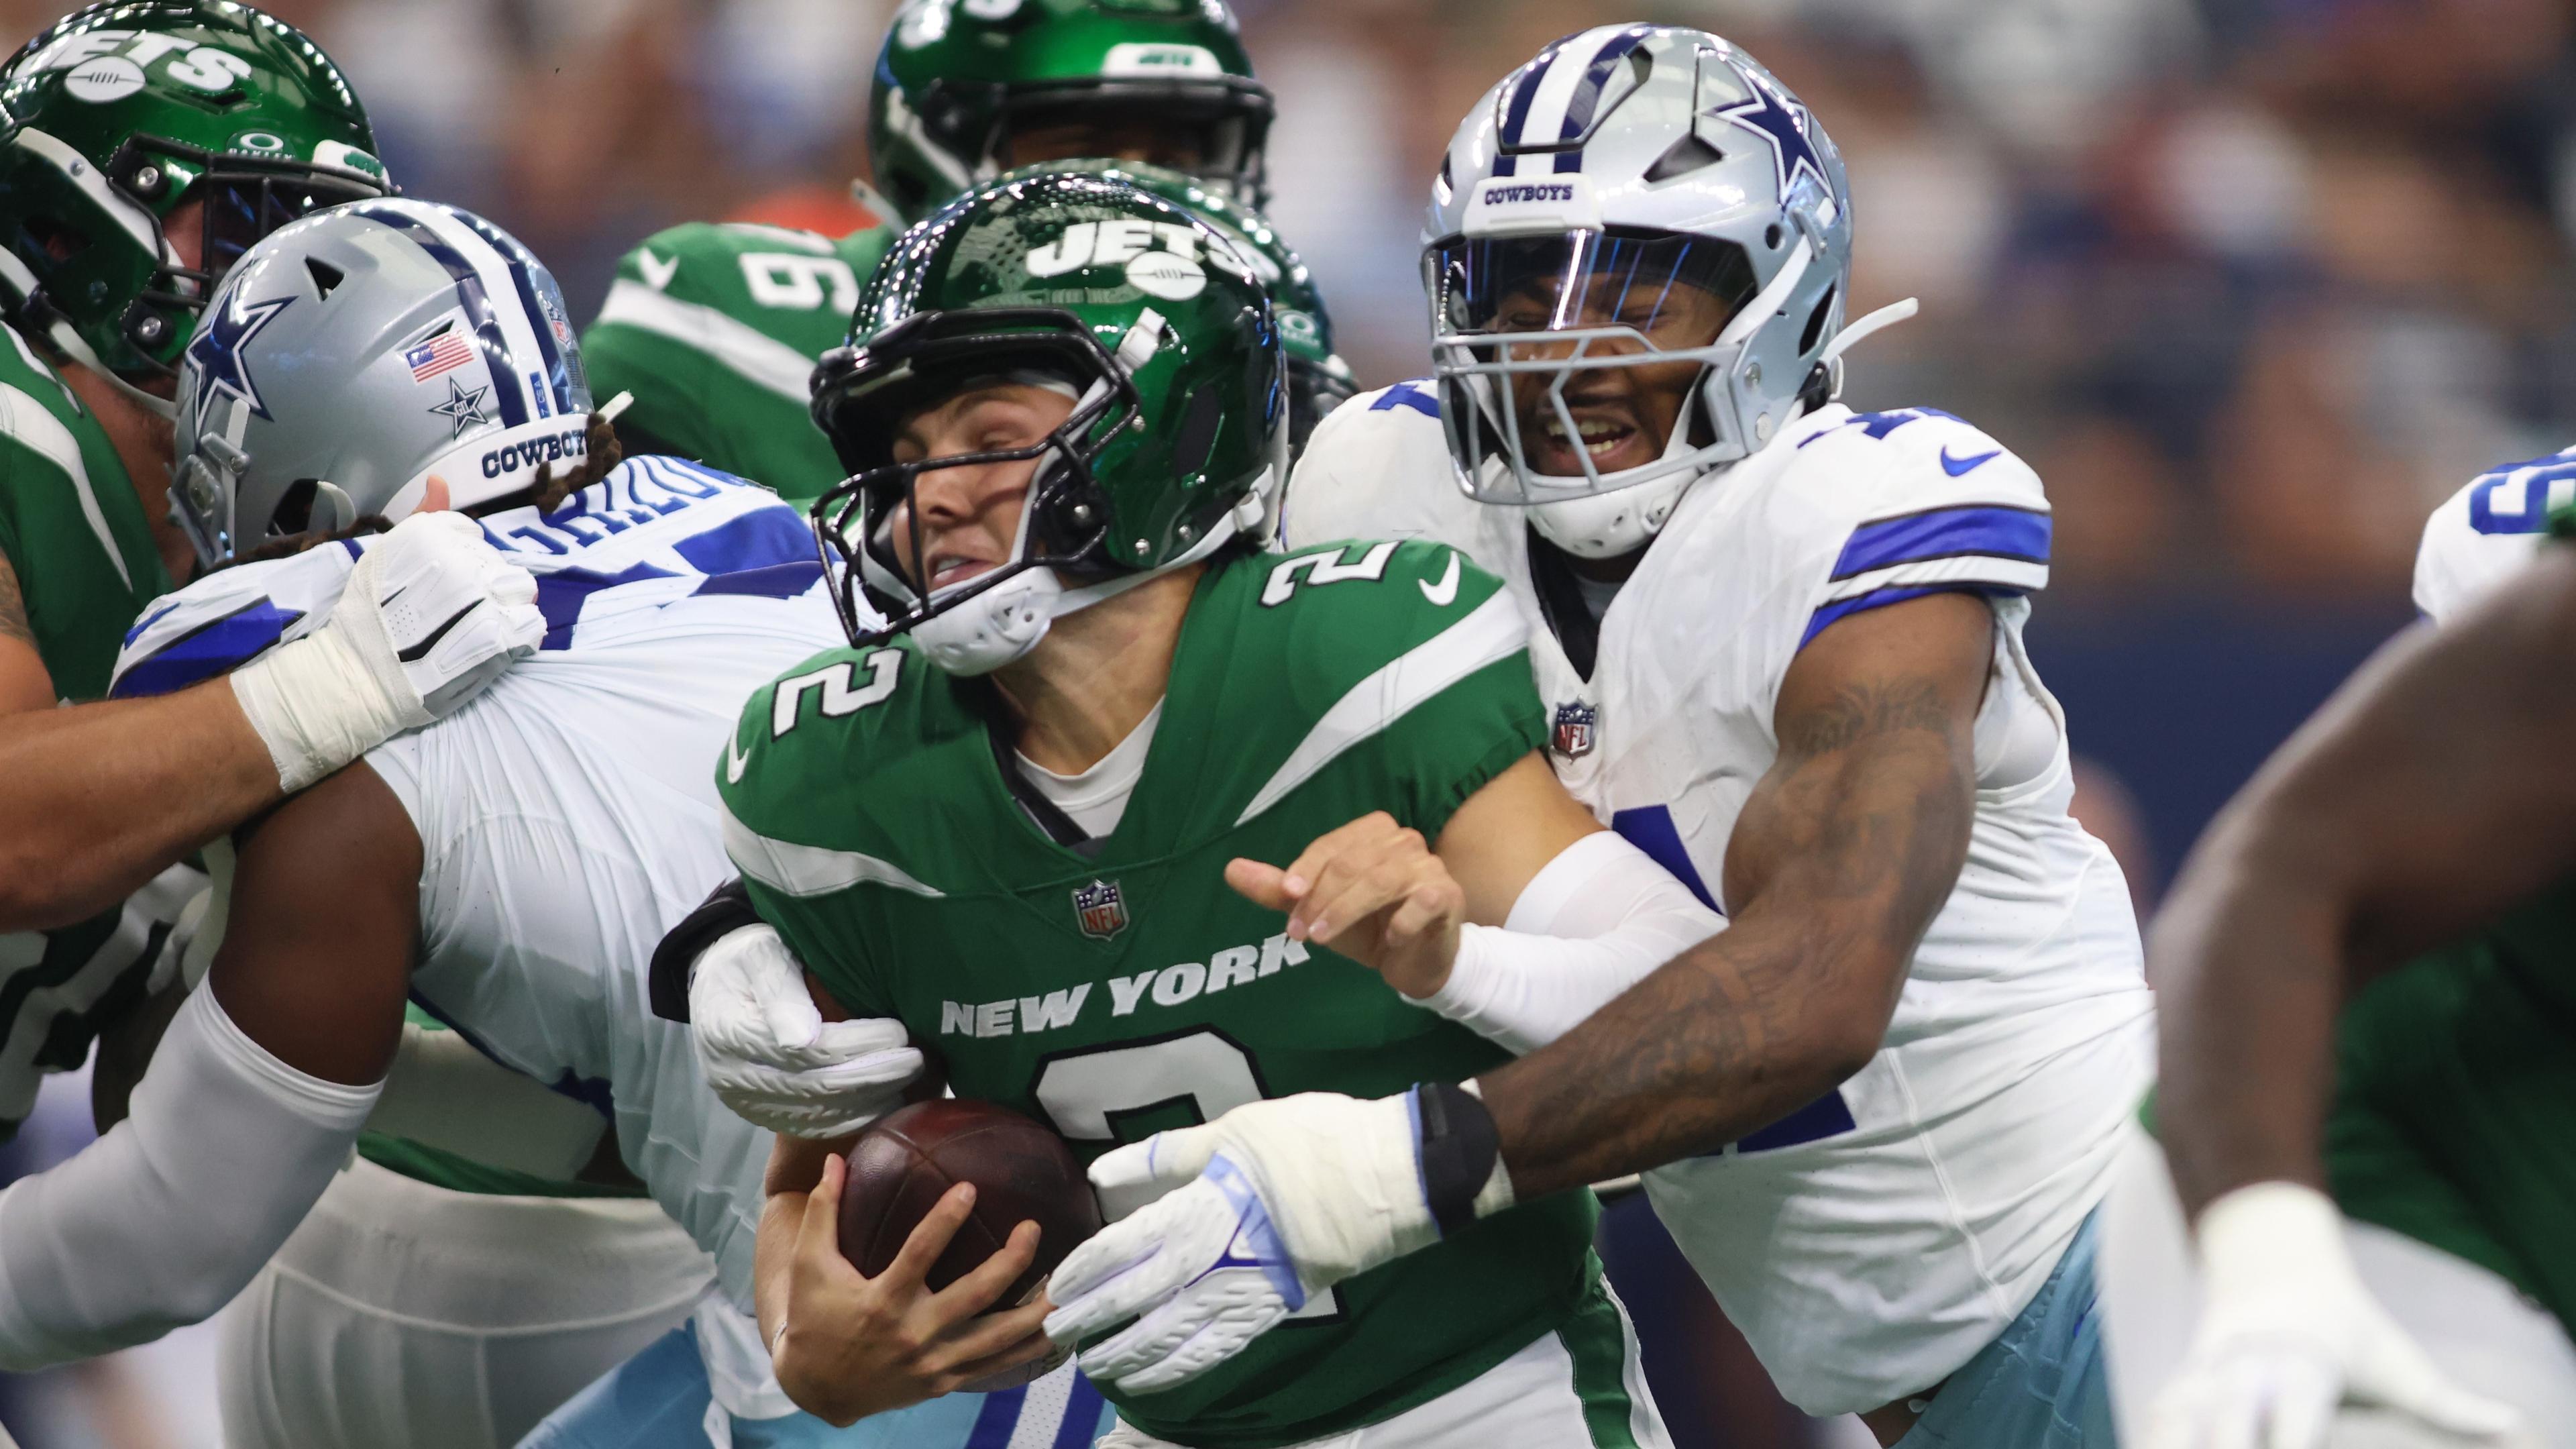 Sep 17, 2023; Arlington, Texas, USA; New York Jets quarterback Zach Wilson (2) is sacked by Dallas Cowboys linebacker Micah Parsons (11) in the first quarter at AT&T Stadium. Mandatory Credit: Tim Heitman-USA TODAY Sports / © Tim Heitman-USA TODAY Sports